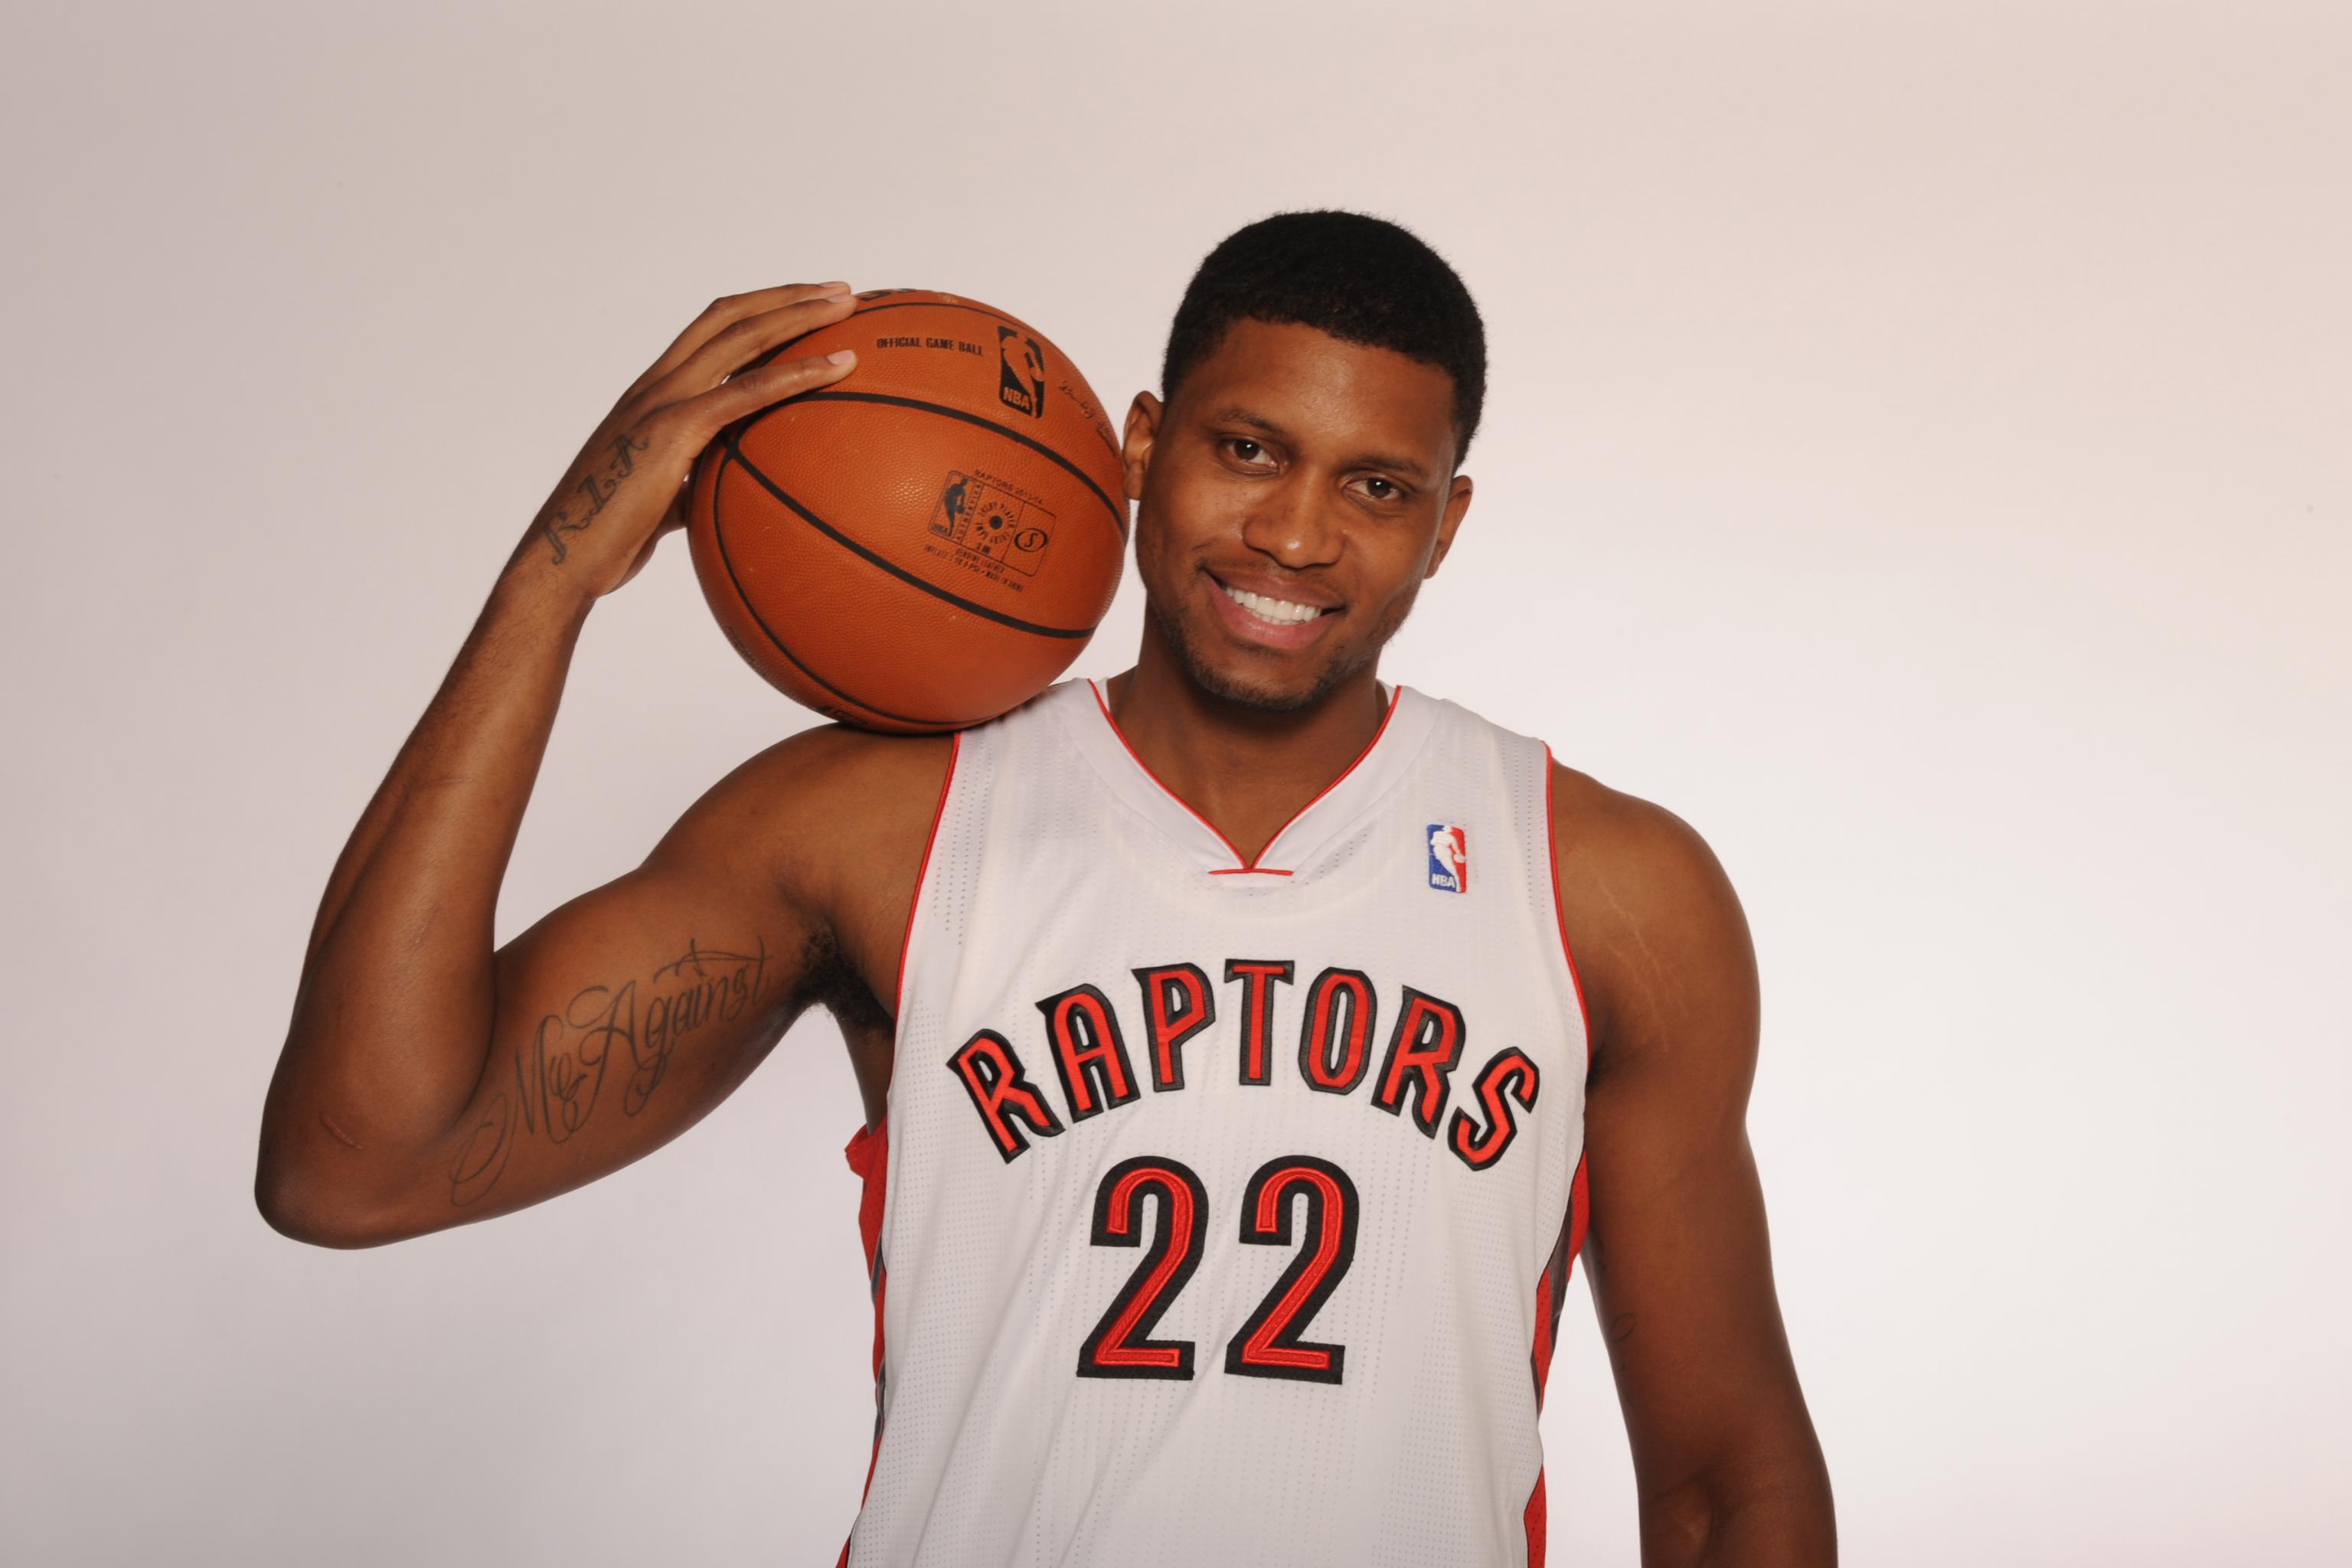 How the Rudy Gay trade (the second one) turned around the Raptors franchise